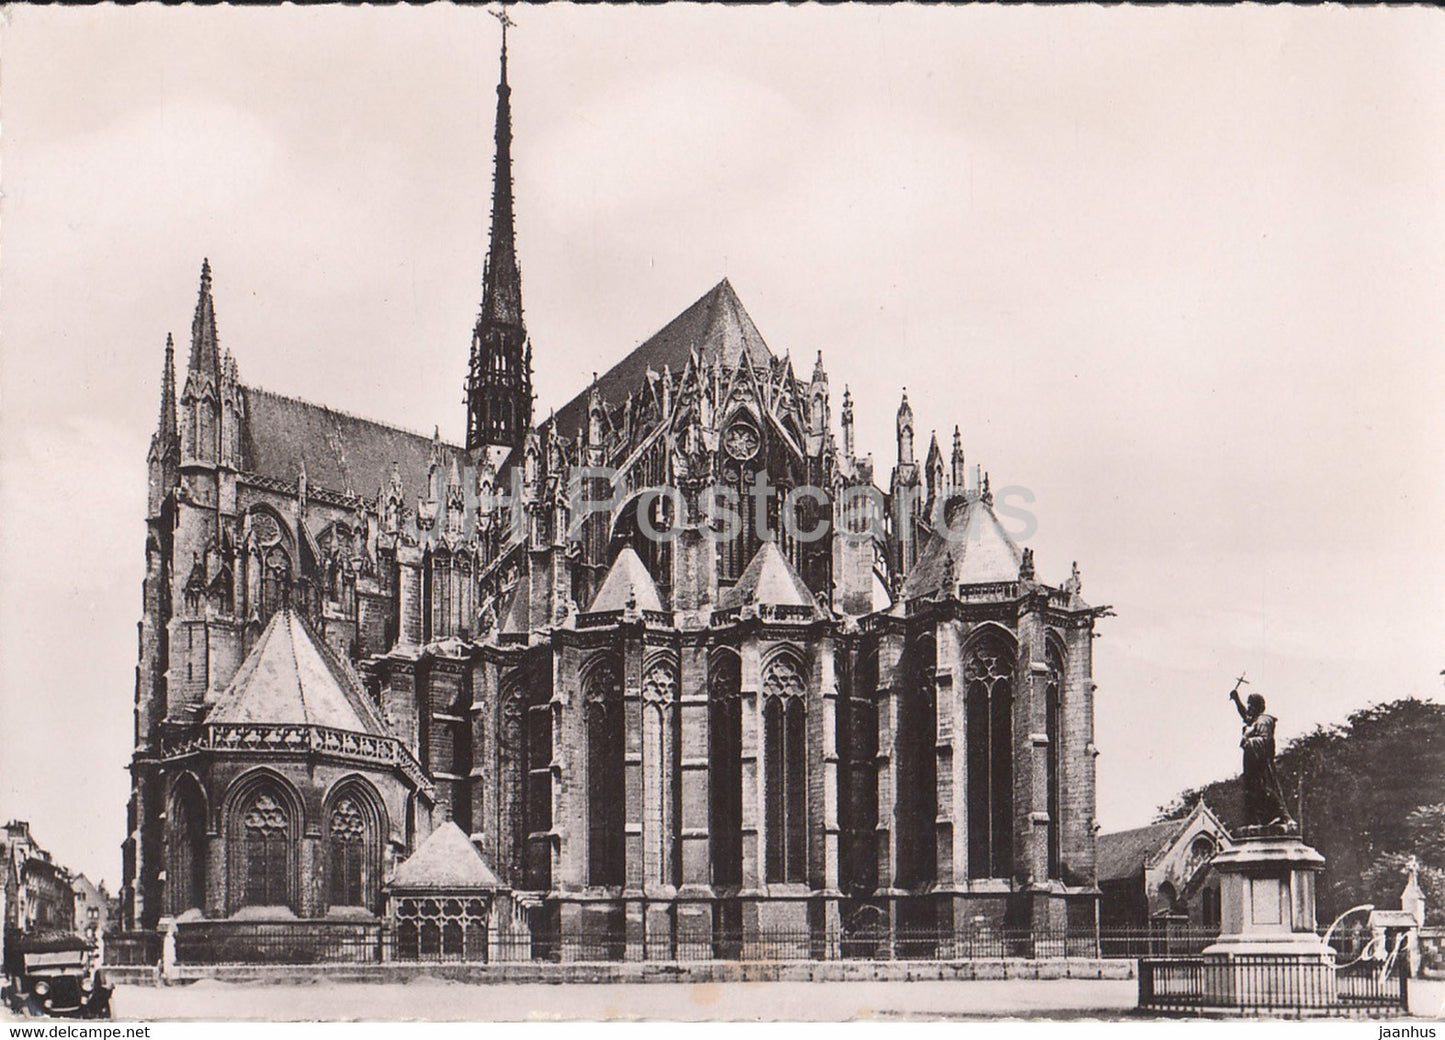 Amiens - La Cathedrale - L'Abside - 4 - cathedral - France - unused - JH Postcards